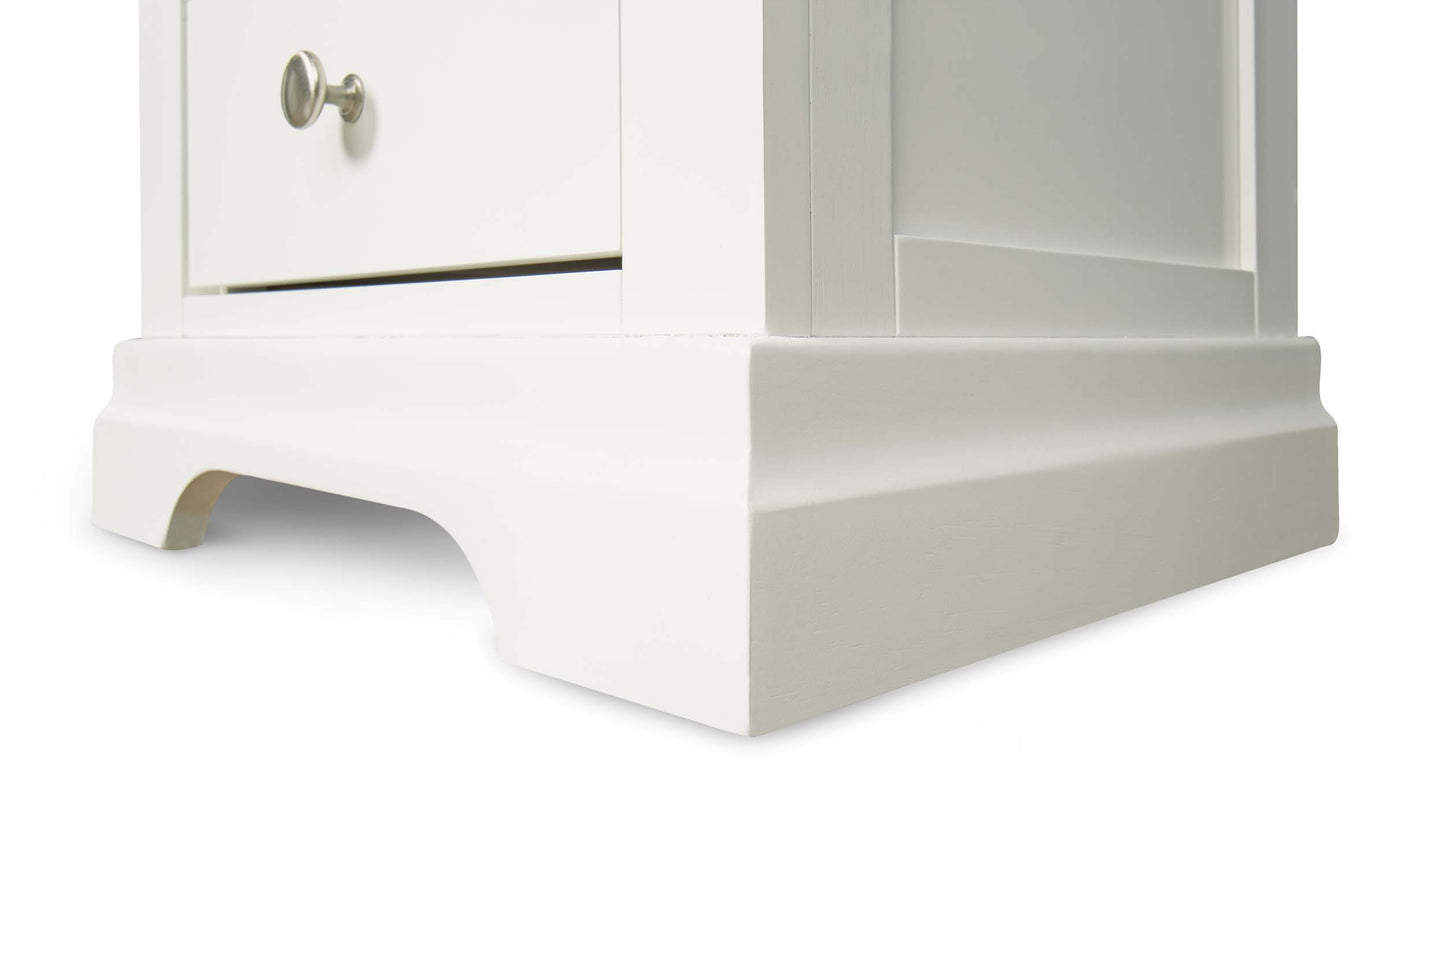 Chambery Bedside Table - Bright White